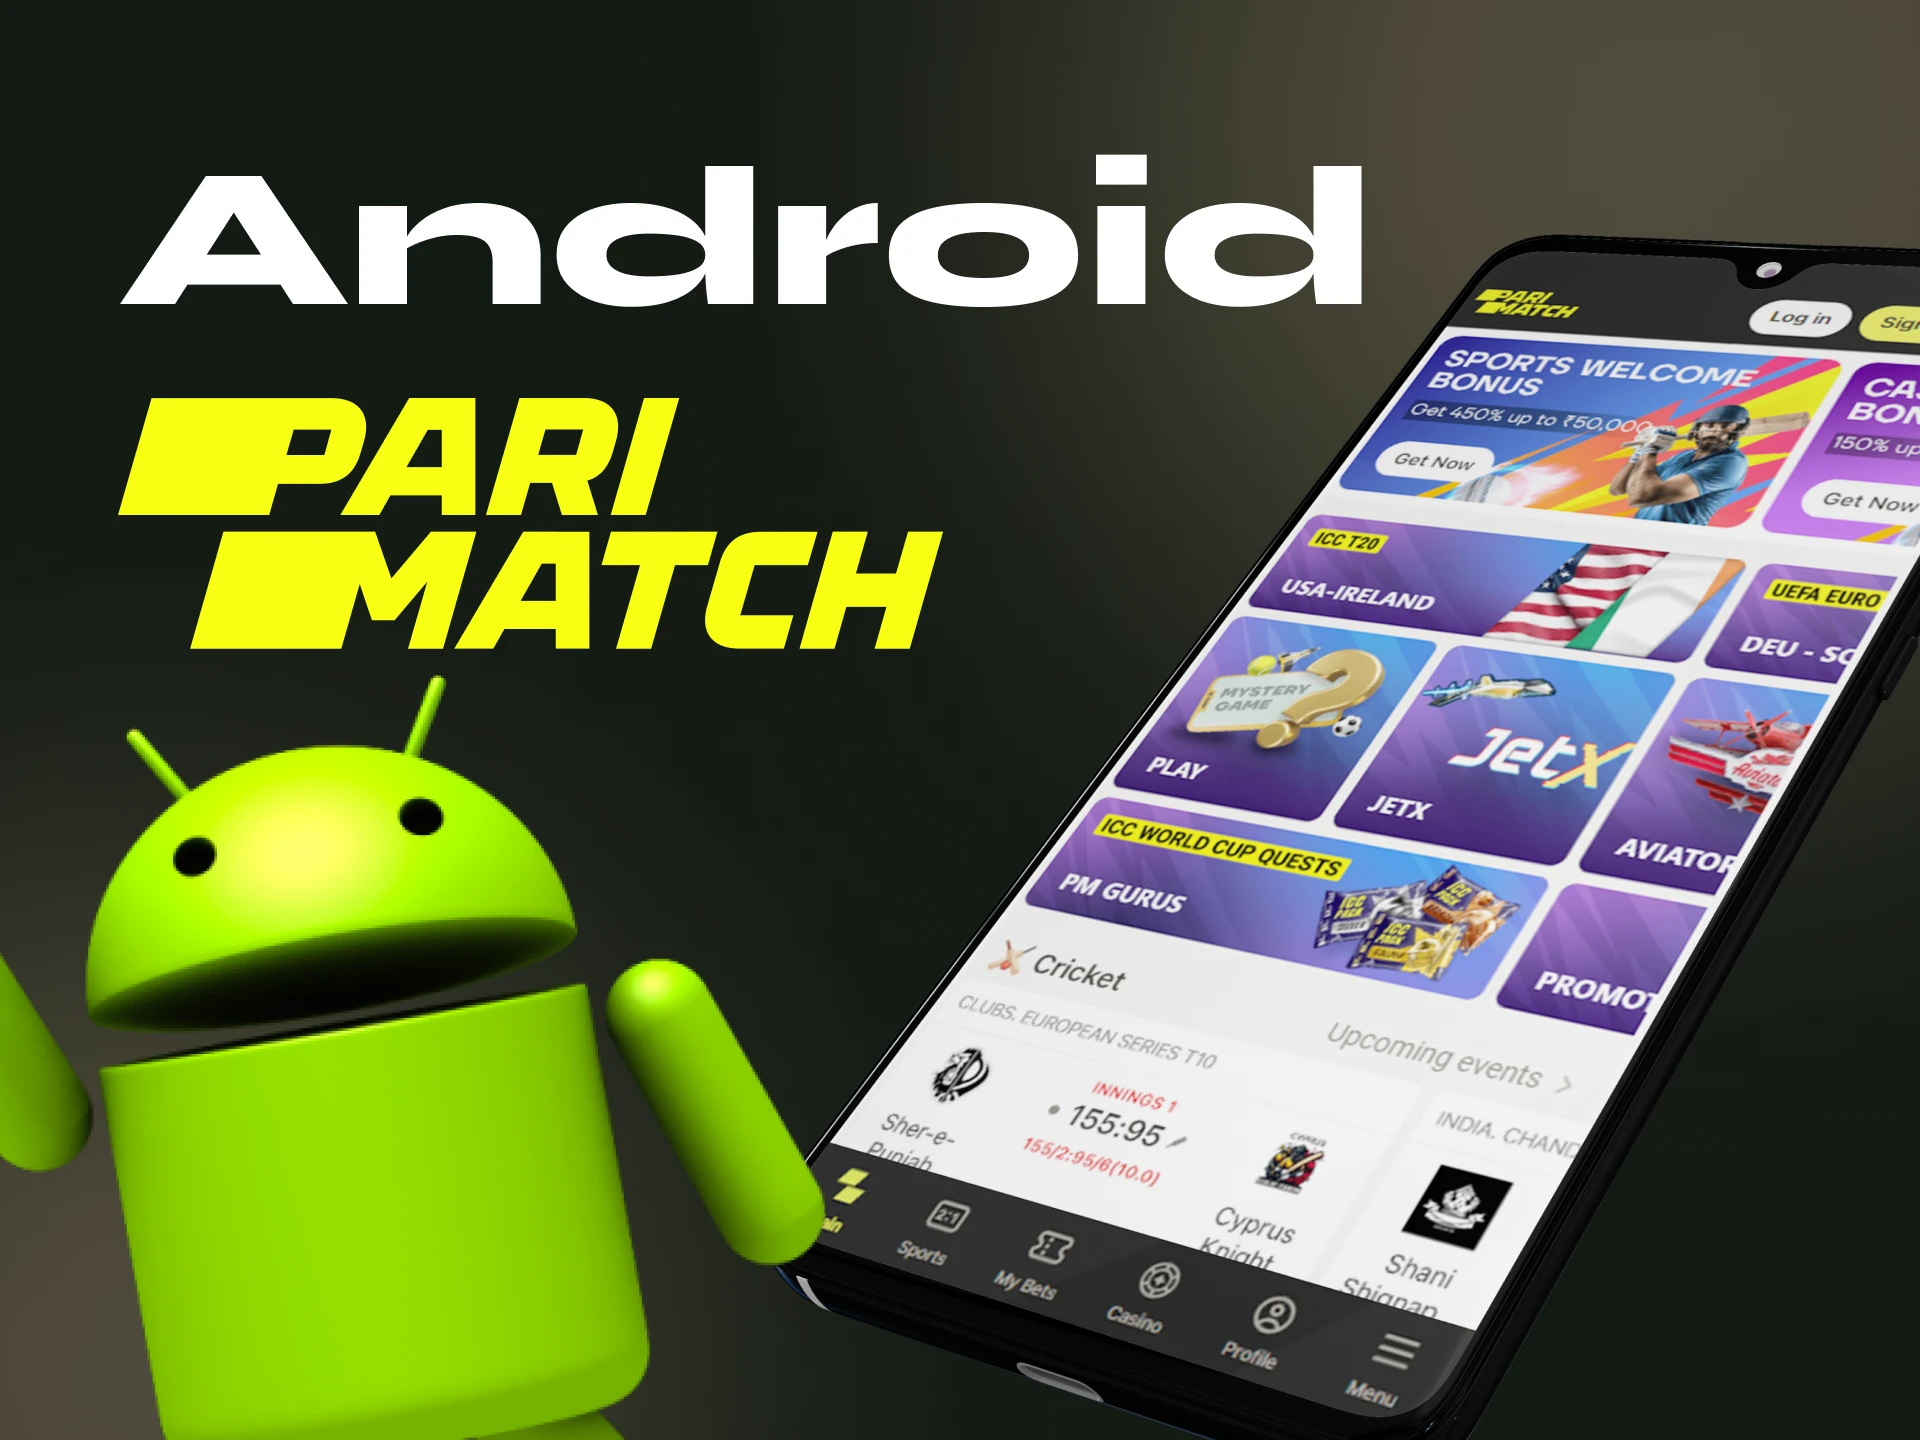 Instructions for players on how to download the Parimatch online casino application on an Android phone.